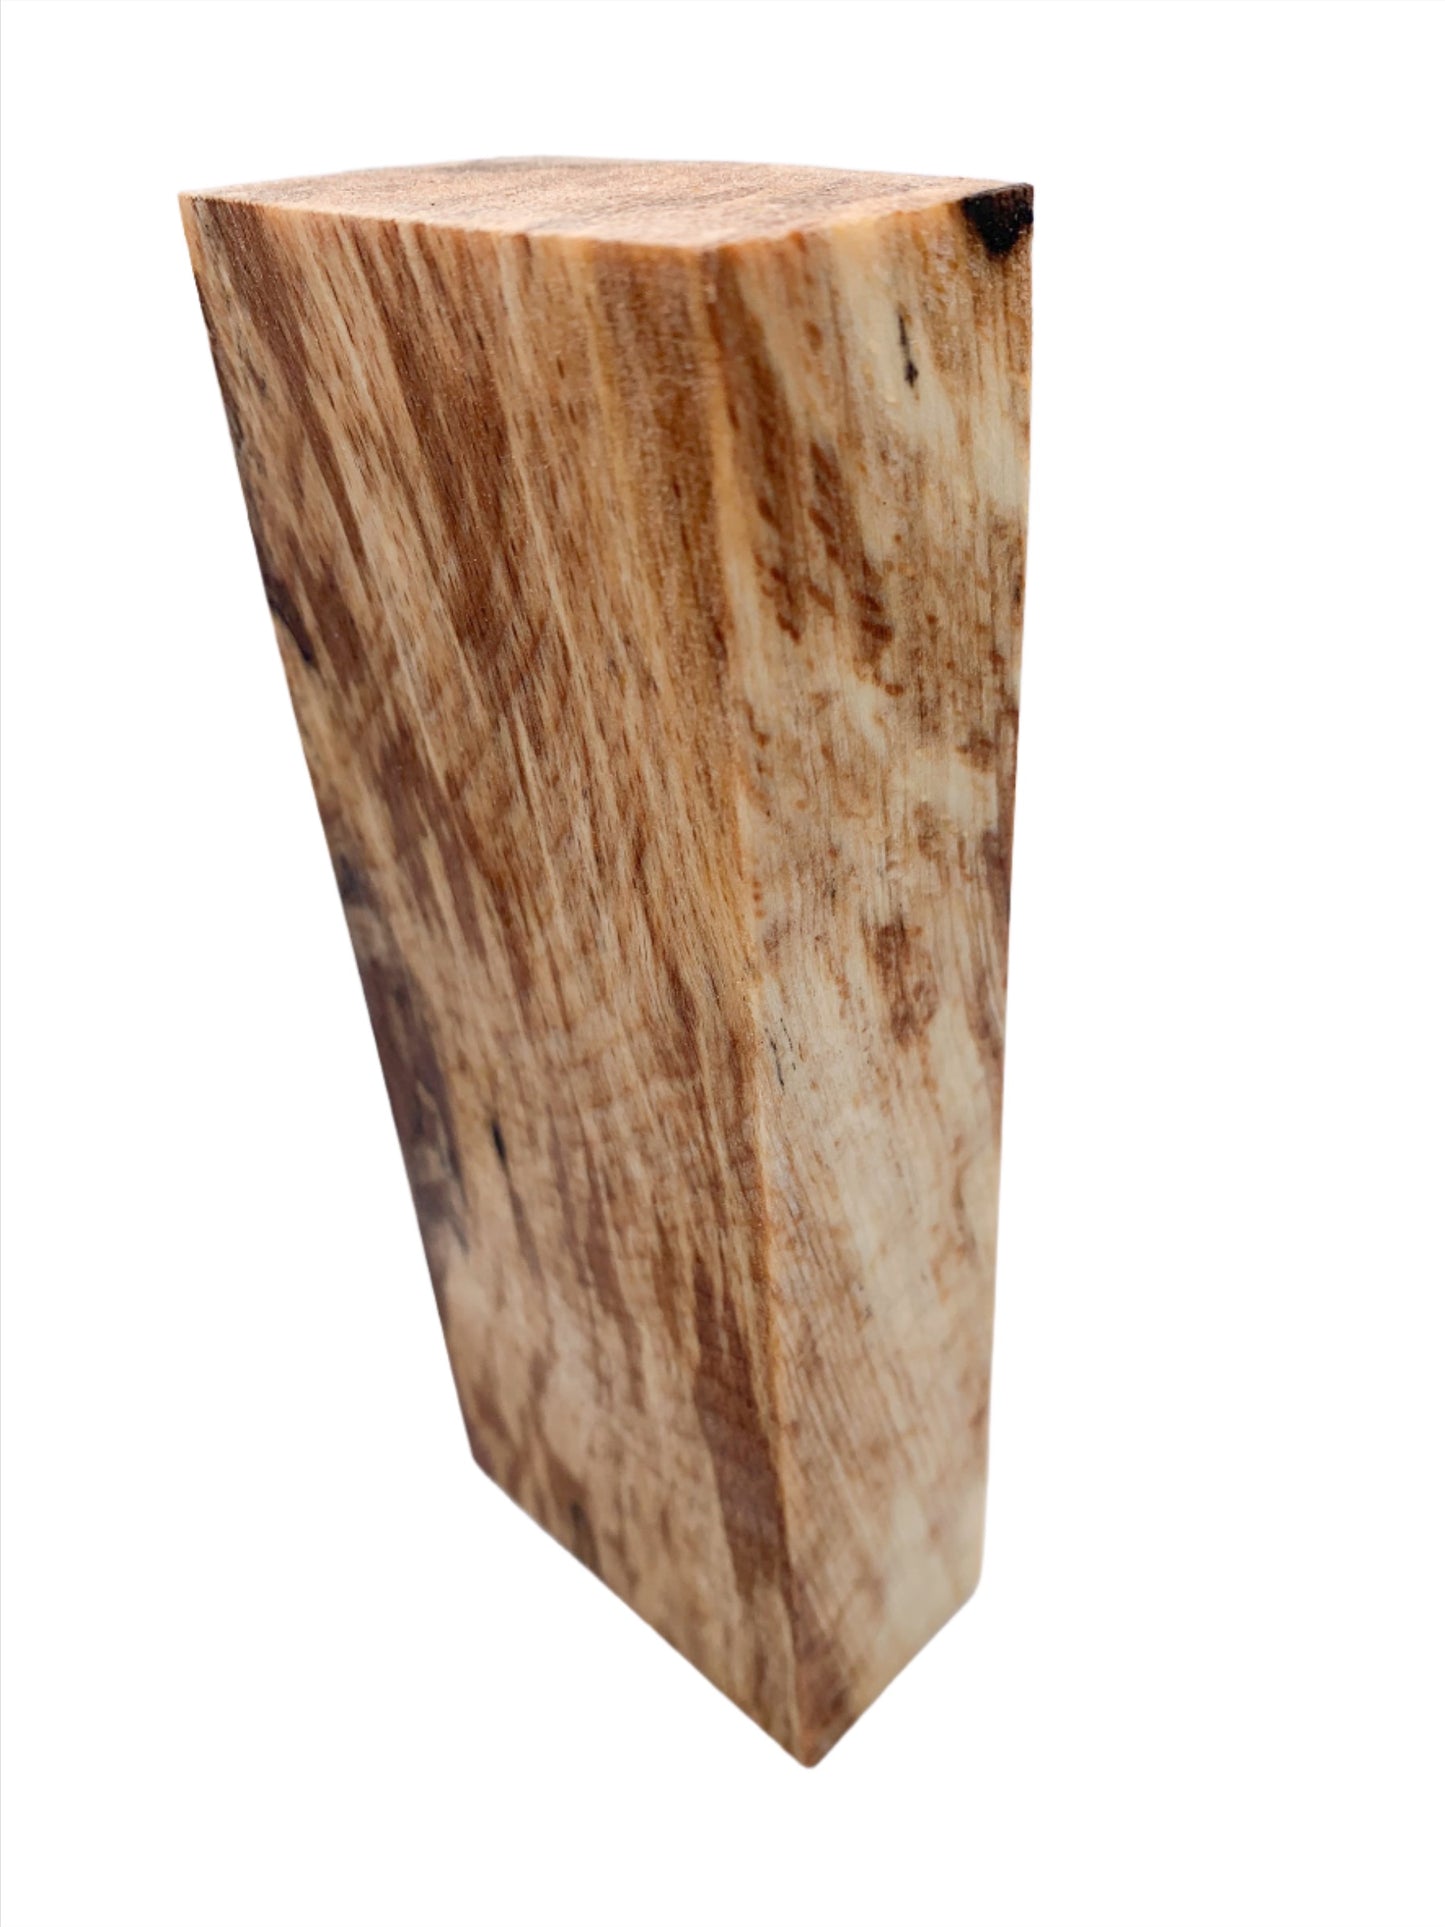 Spalted Beech Wood Knife Scale / Craft Blank | Fully Stabilised | 139x55x28 | Wooden Knife Handle